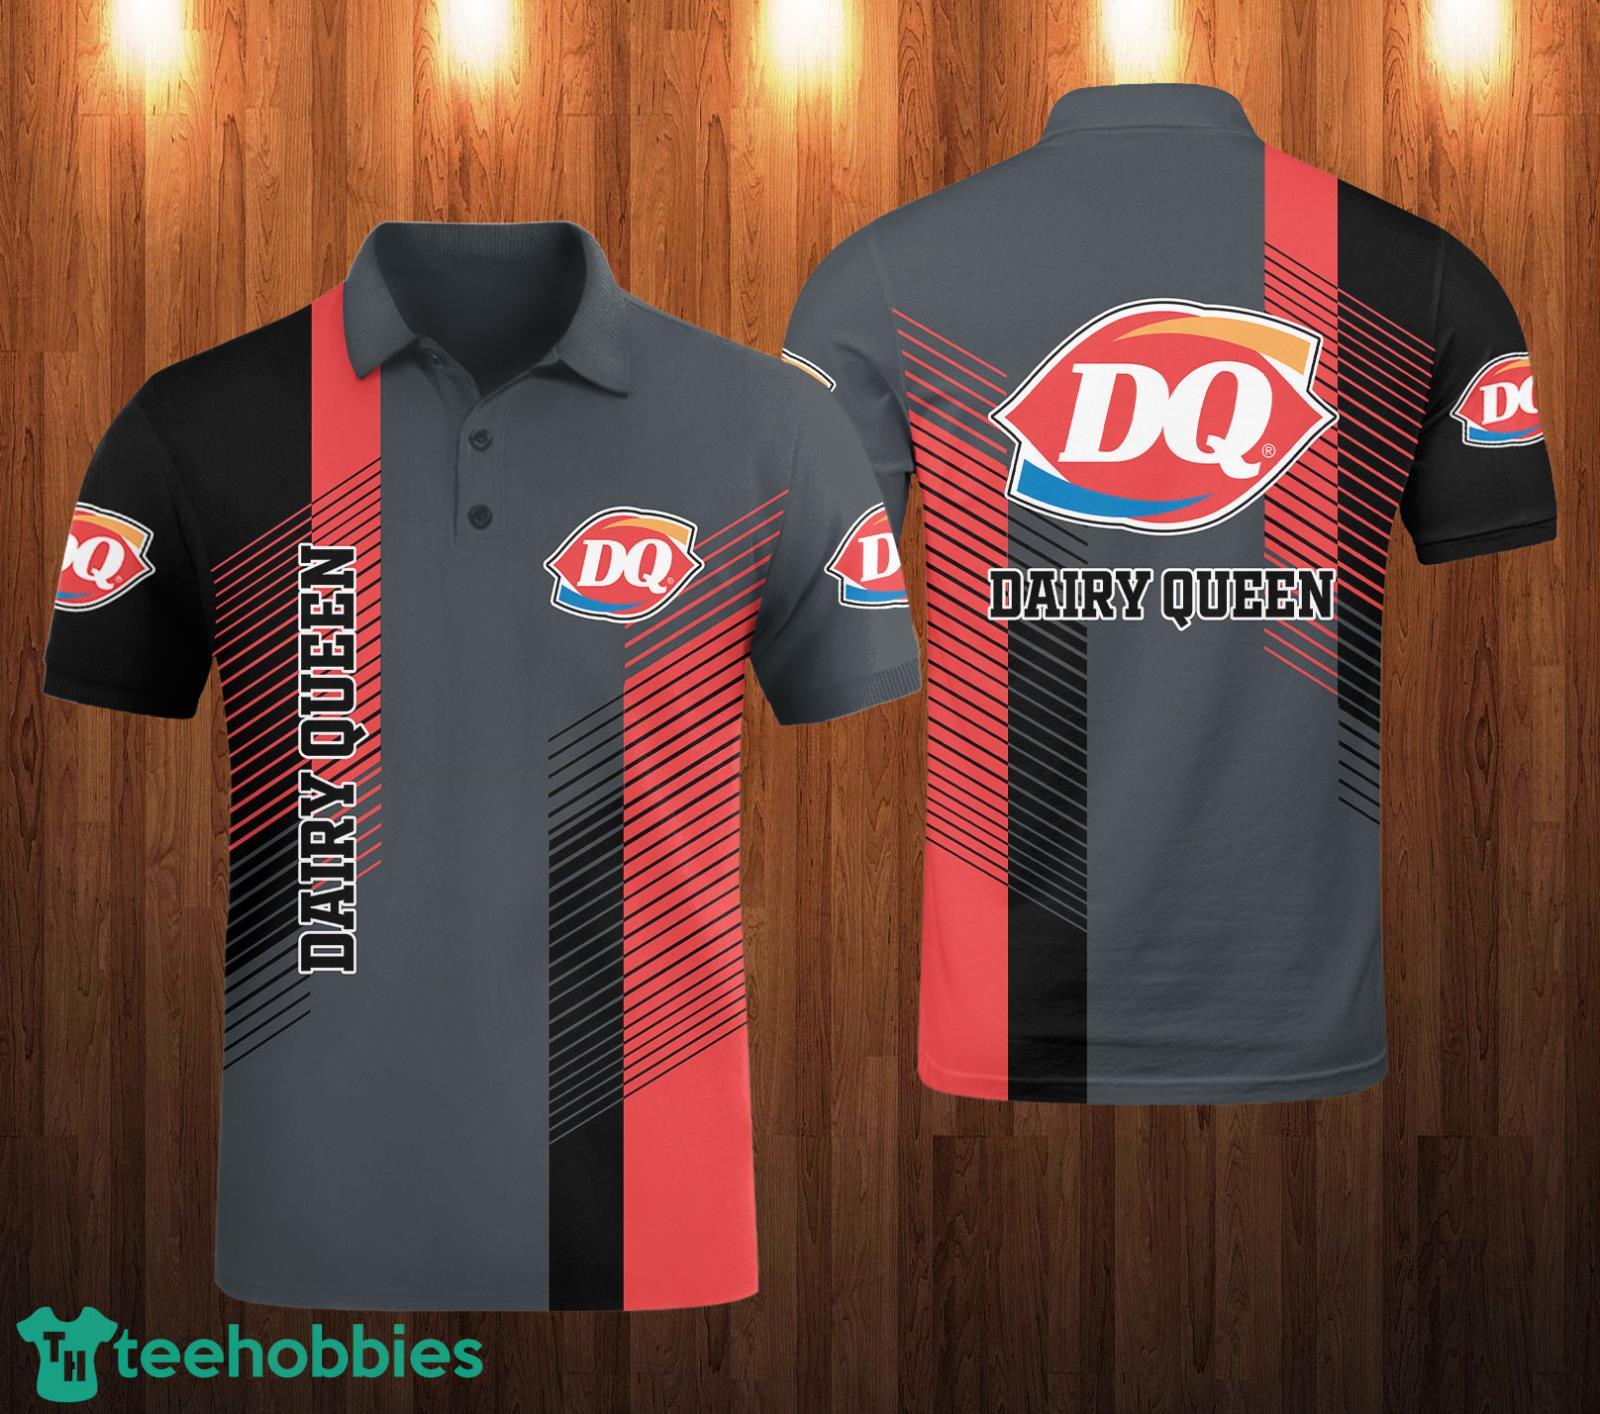 Dairy Queen Black Baseball Jersey - T-shirts Low Price